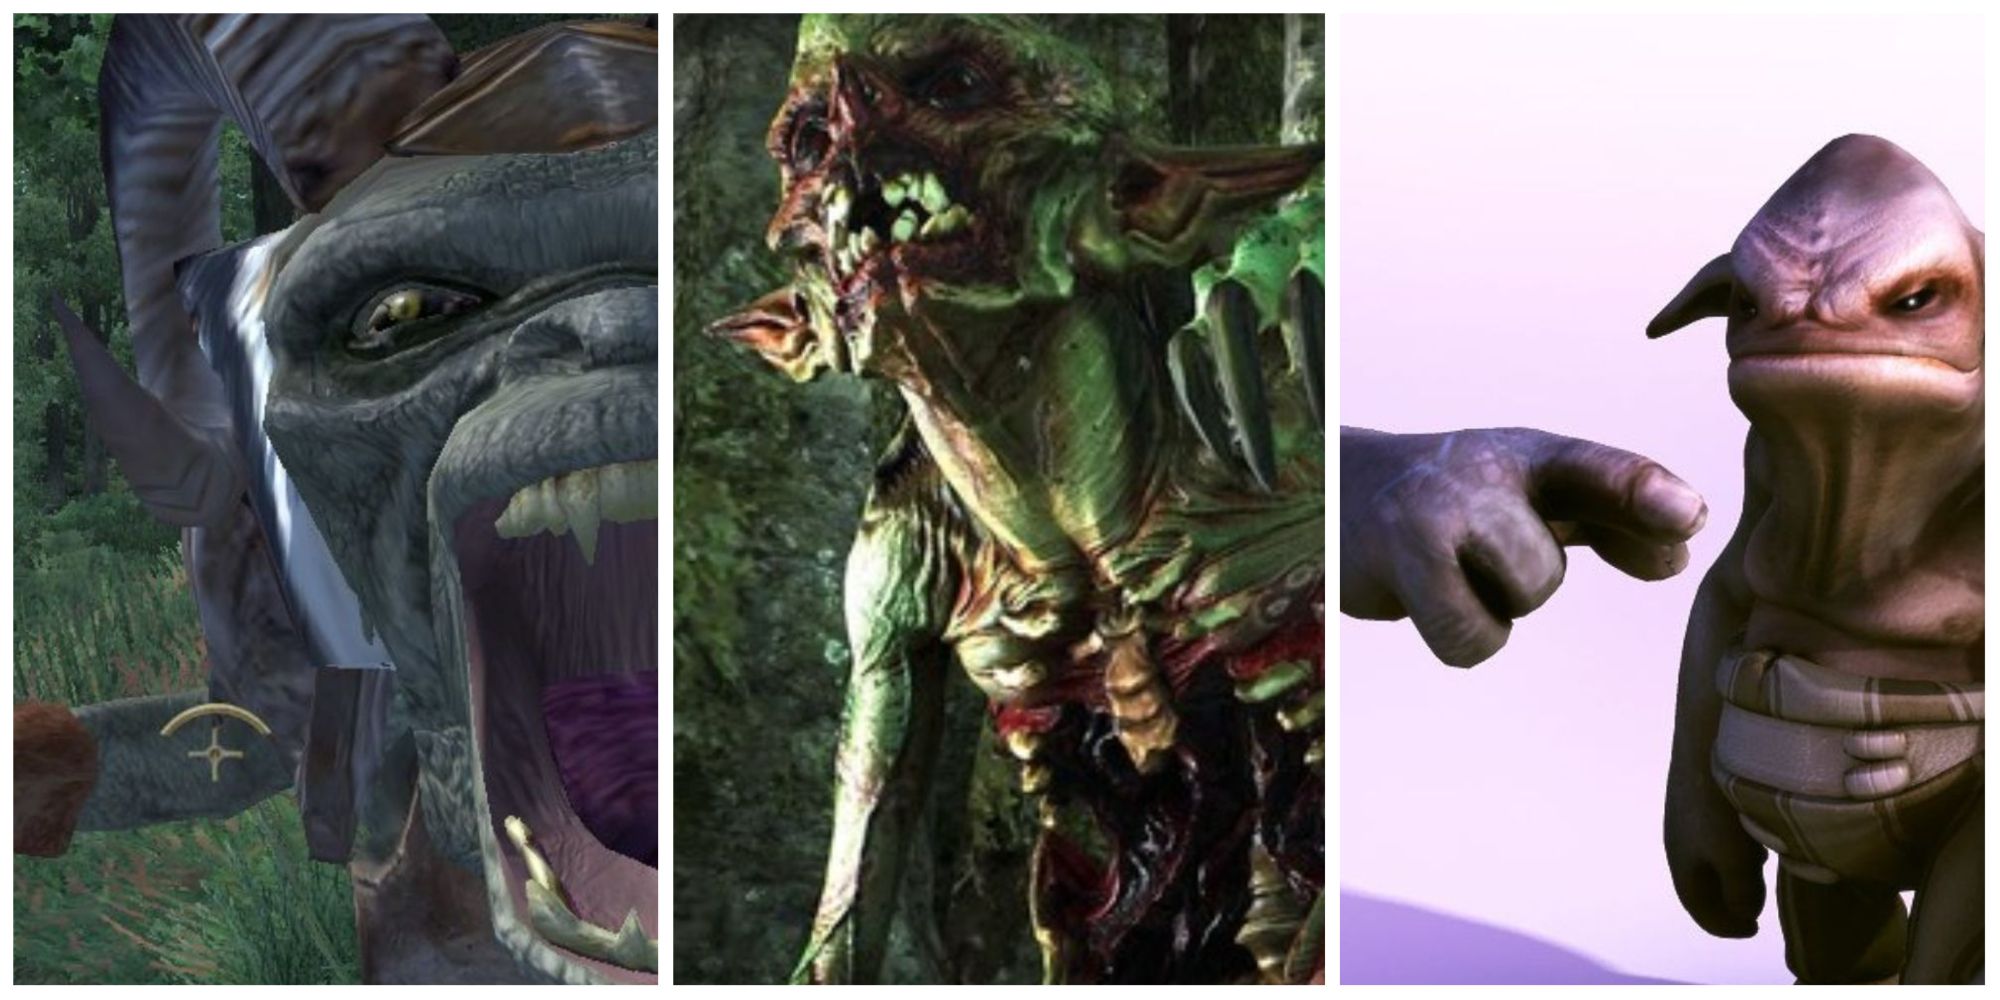 Goblins as portrayed in Oblivion, The Witcher 3 and Fable II